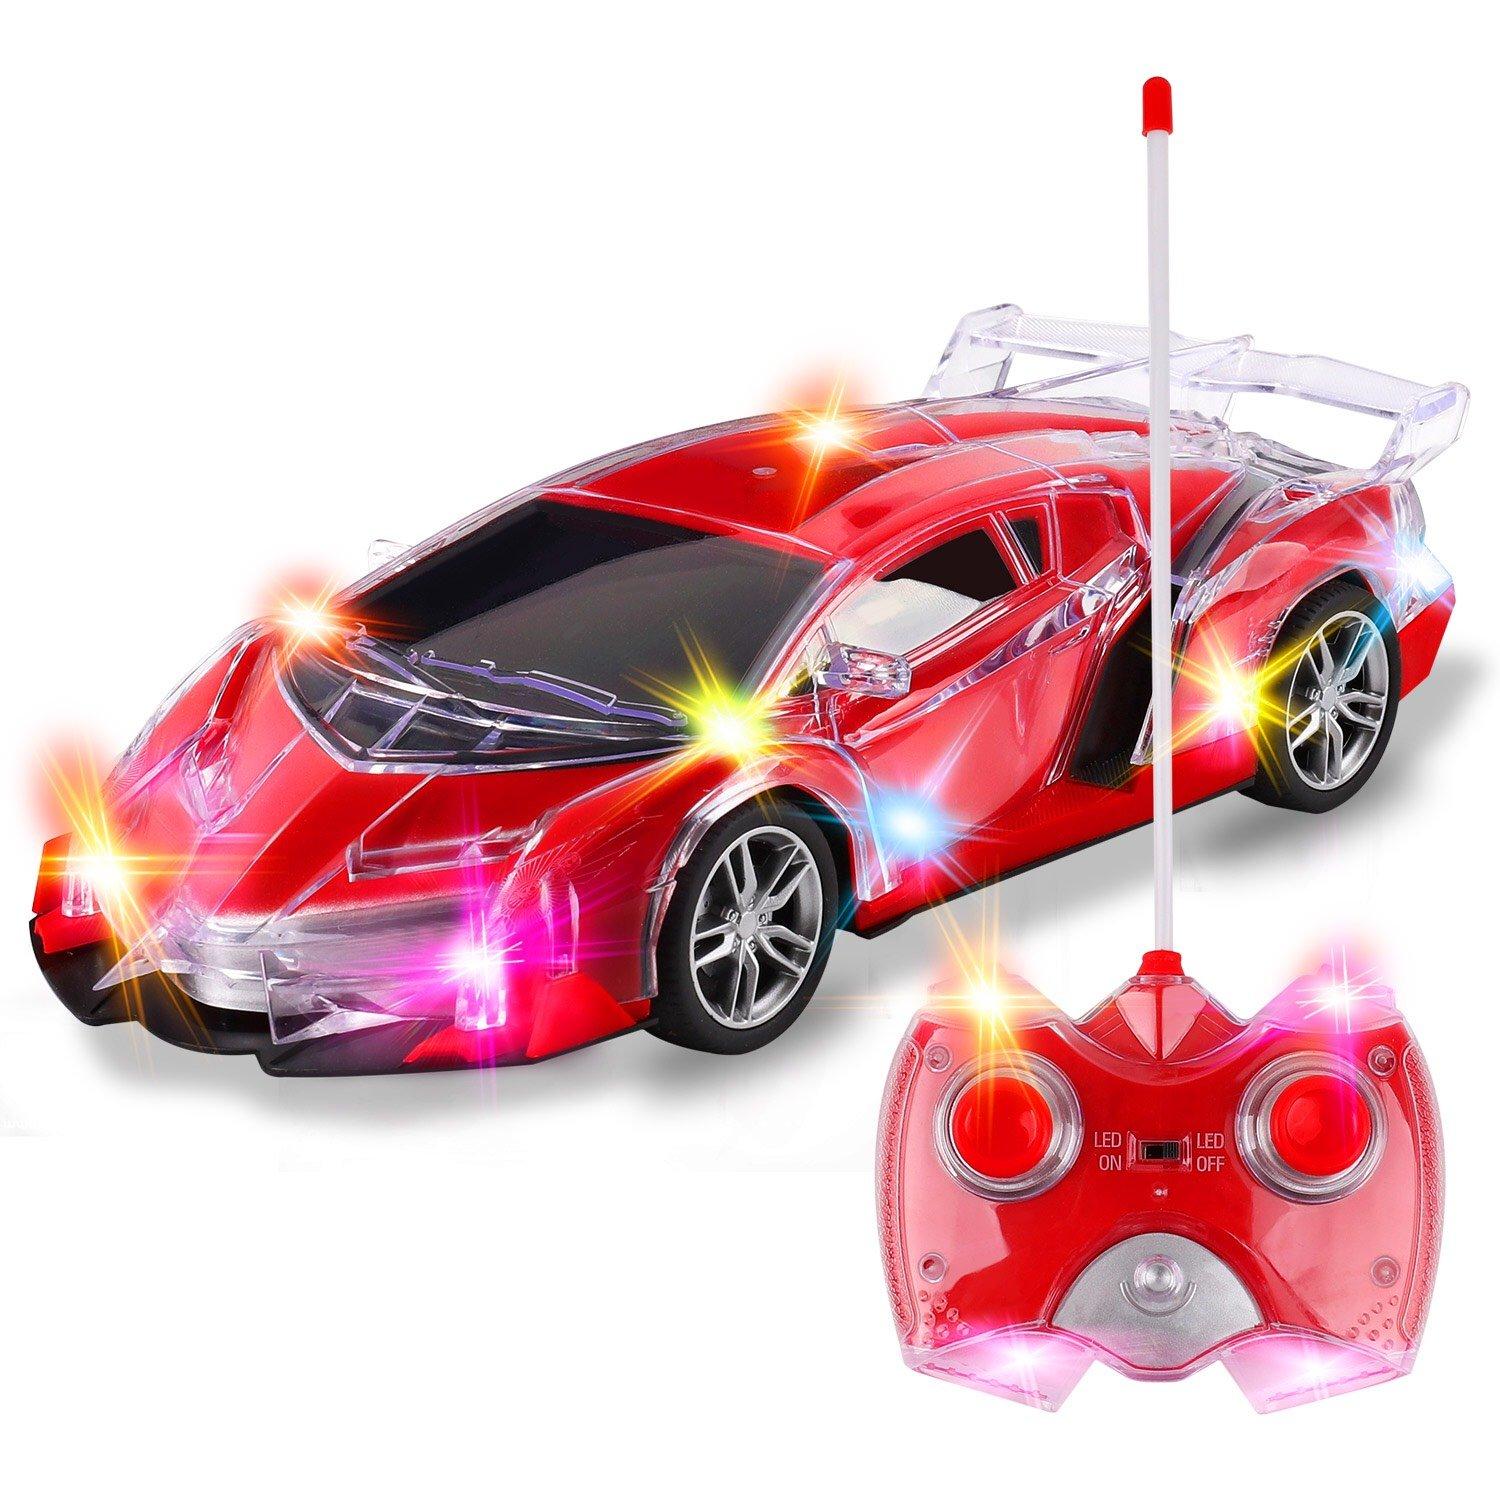 Remote Control Car With Lights:  Tips for Maintaining Your Remote Control Car with Lights